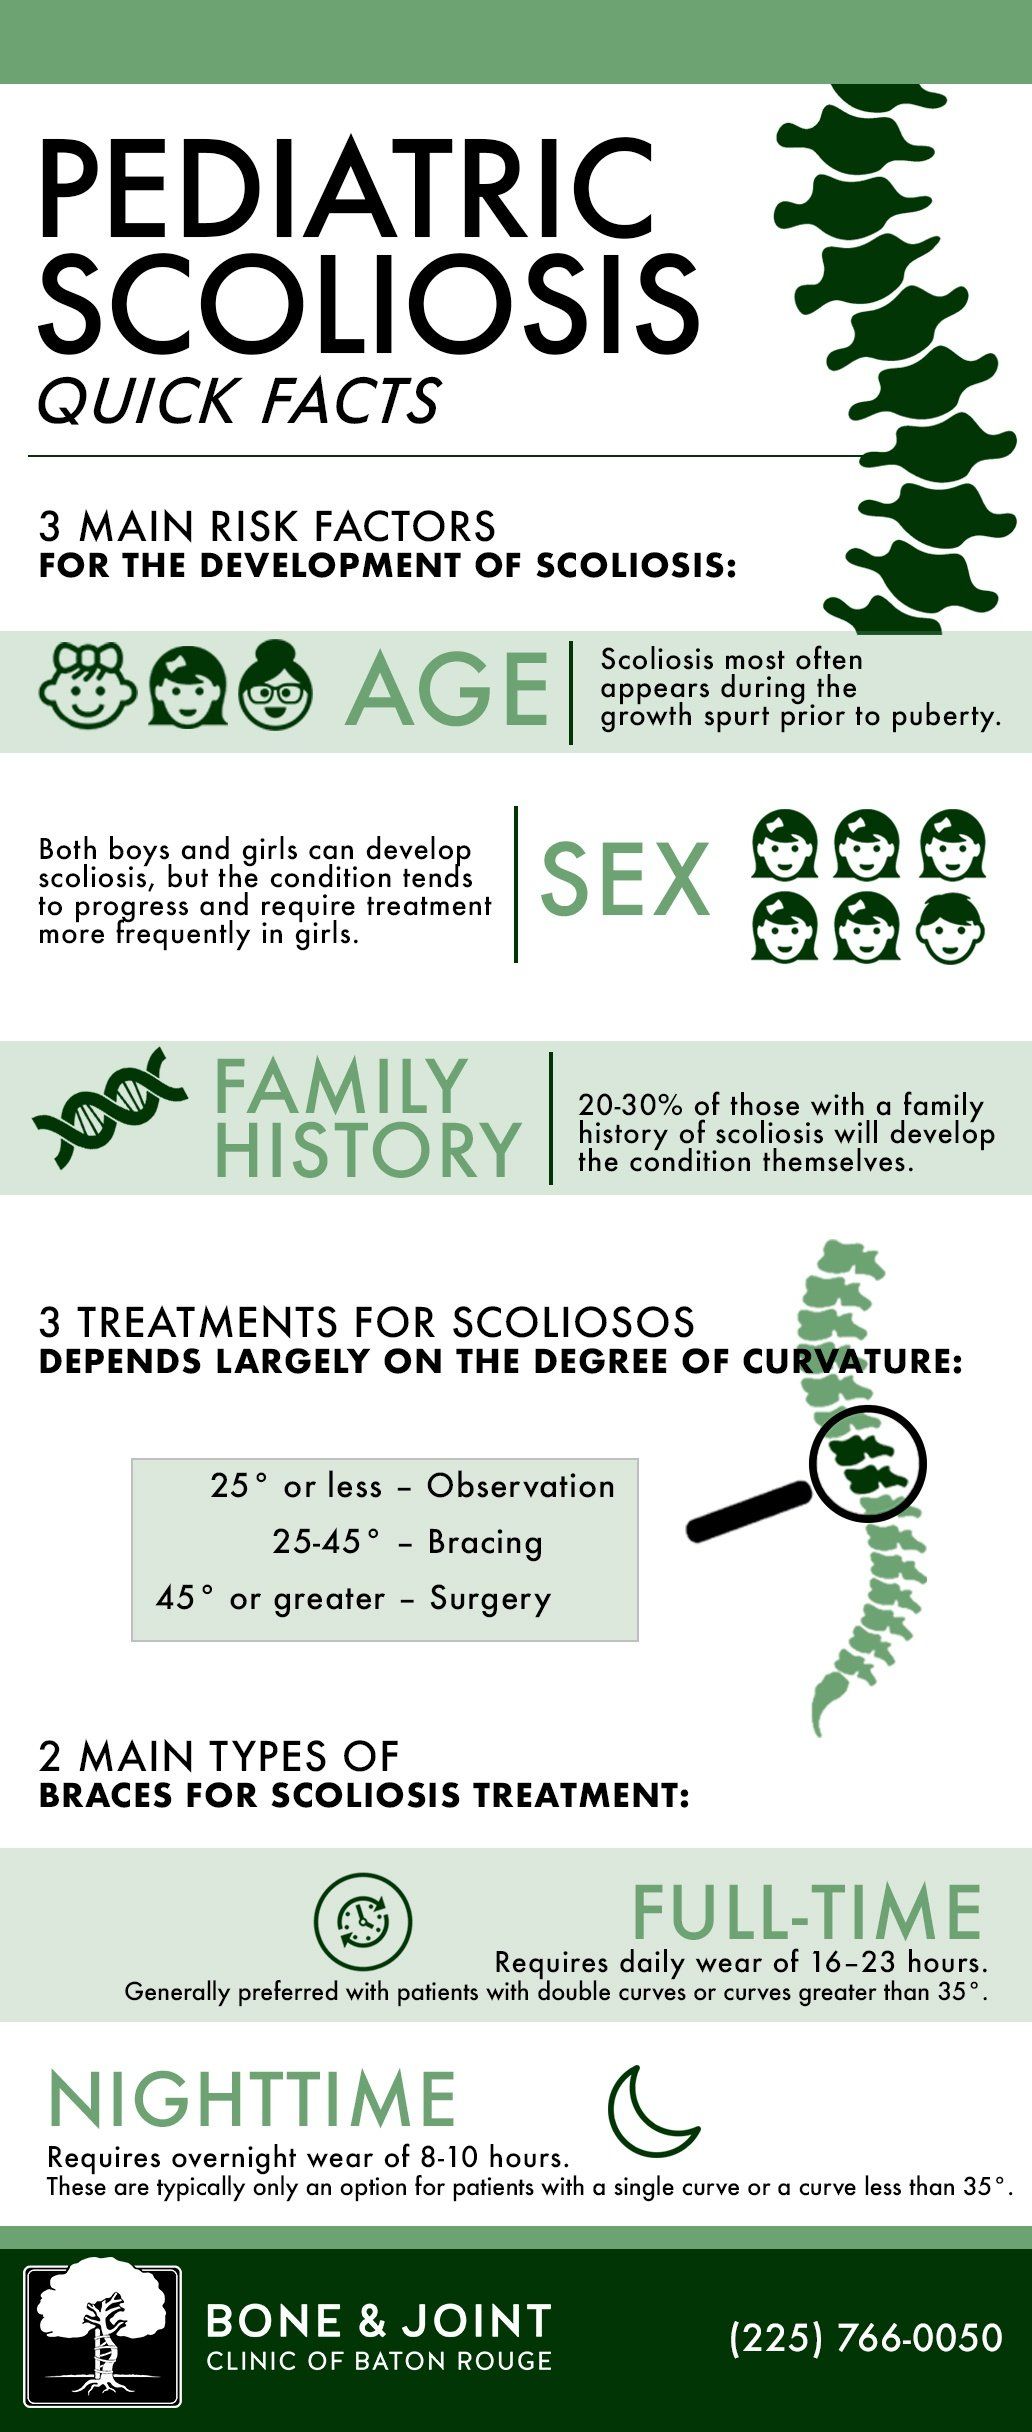 Quick Facts About Pediatric Scoliosis [Infographic]